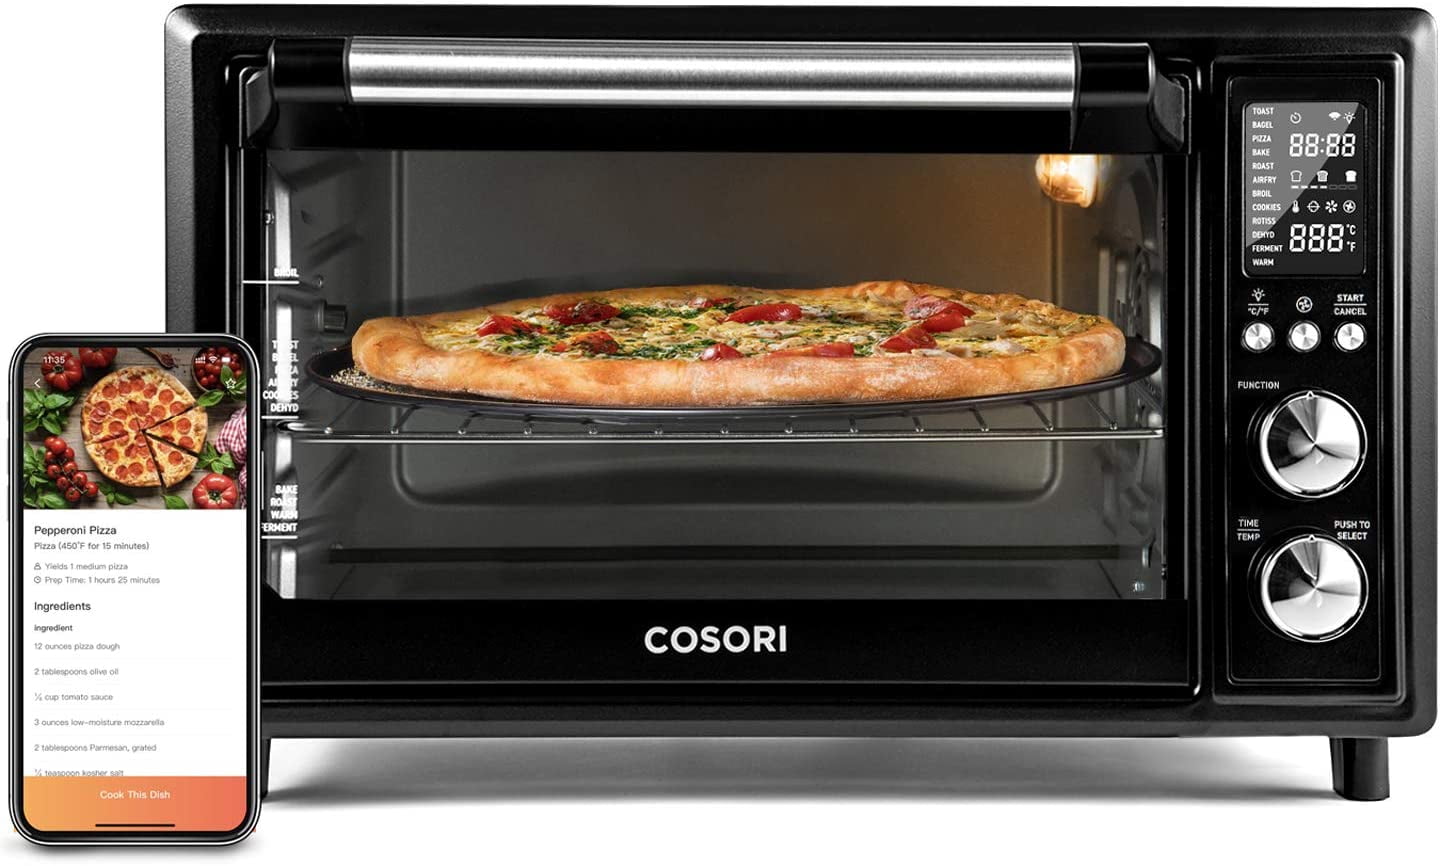 COSORI Smart New Air Fryer Toaster Oven, Large 32-Quart, Stainless Steel,  Walmart Exclusive Bonus, Silver 